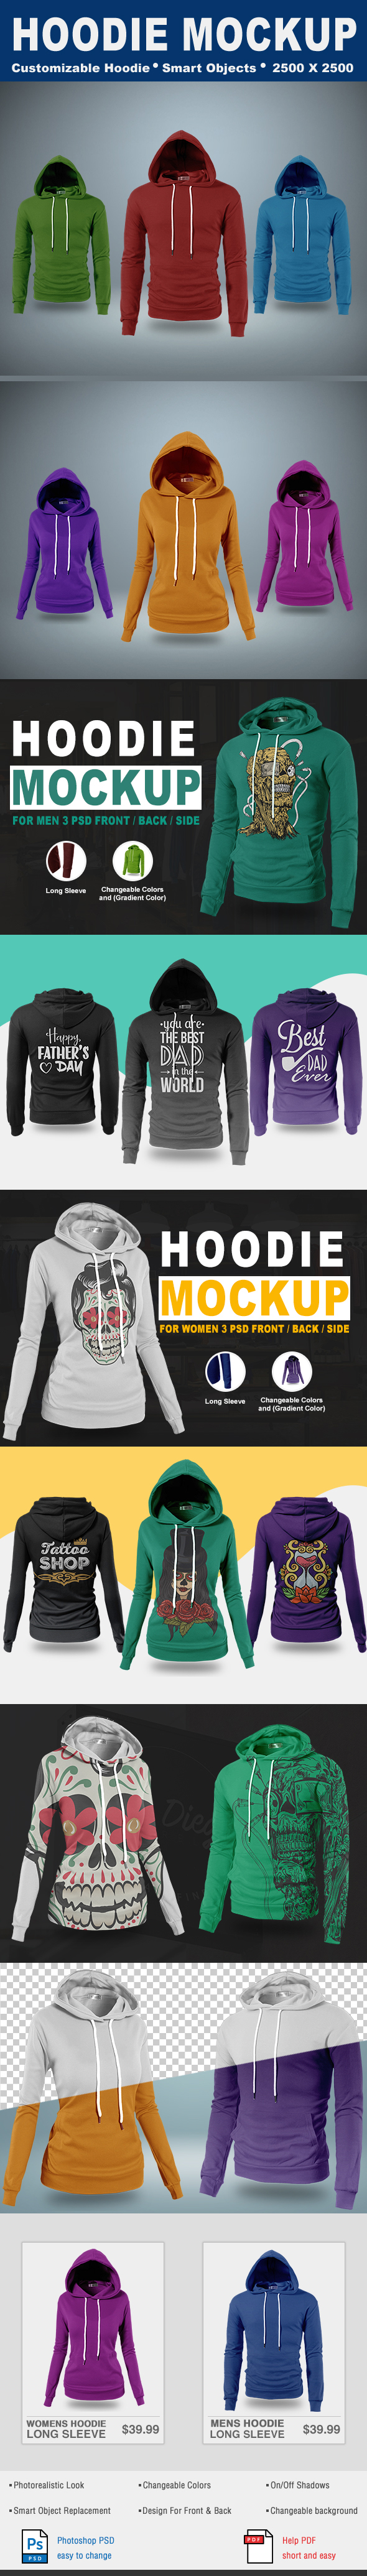 hoodie Mockup apparel clothes wear model design branding  template product